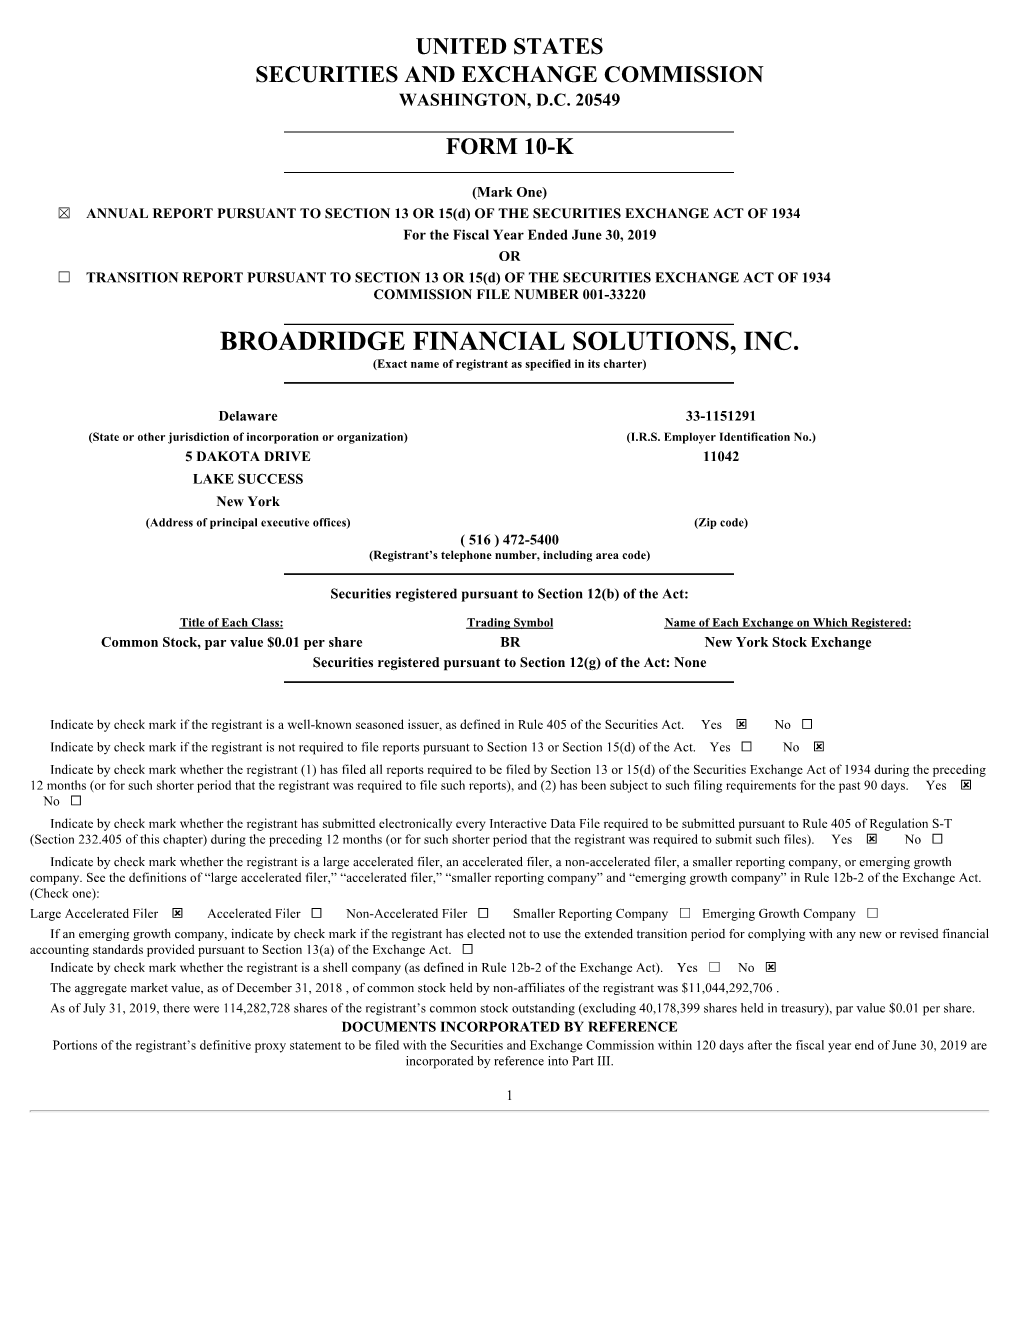 BROADRIDGE FINANCIAL SOLUTIONS, INC. (Exact Name of Registrant As Specified in Its Charter)